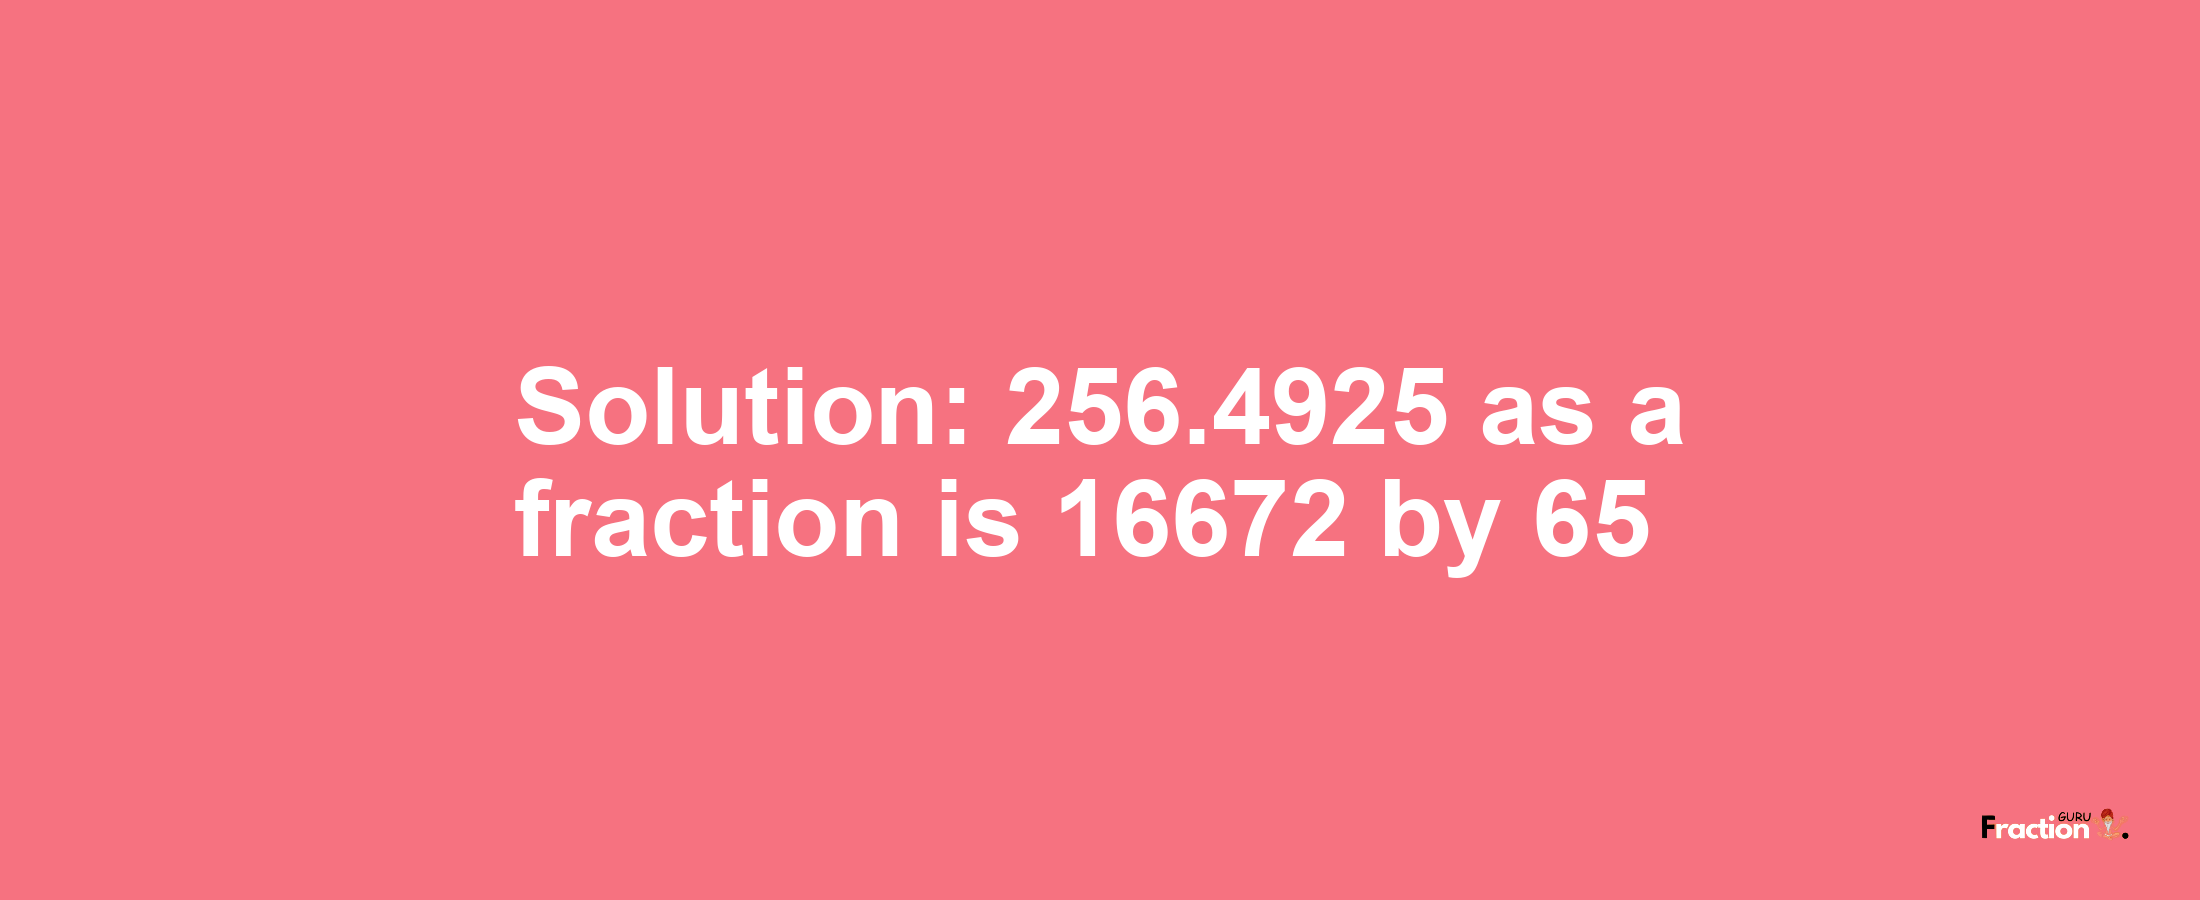 Solution:256.4925 as a fraction is 16672/65